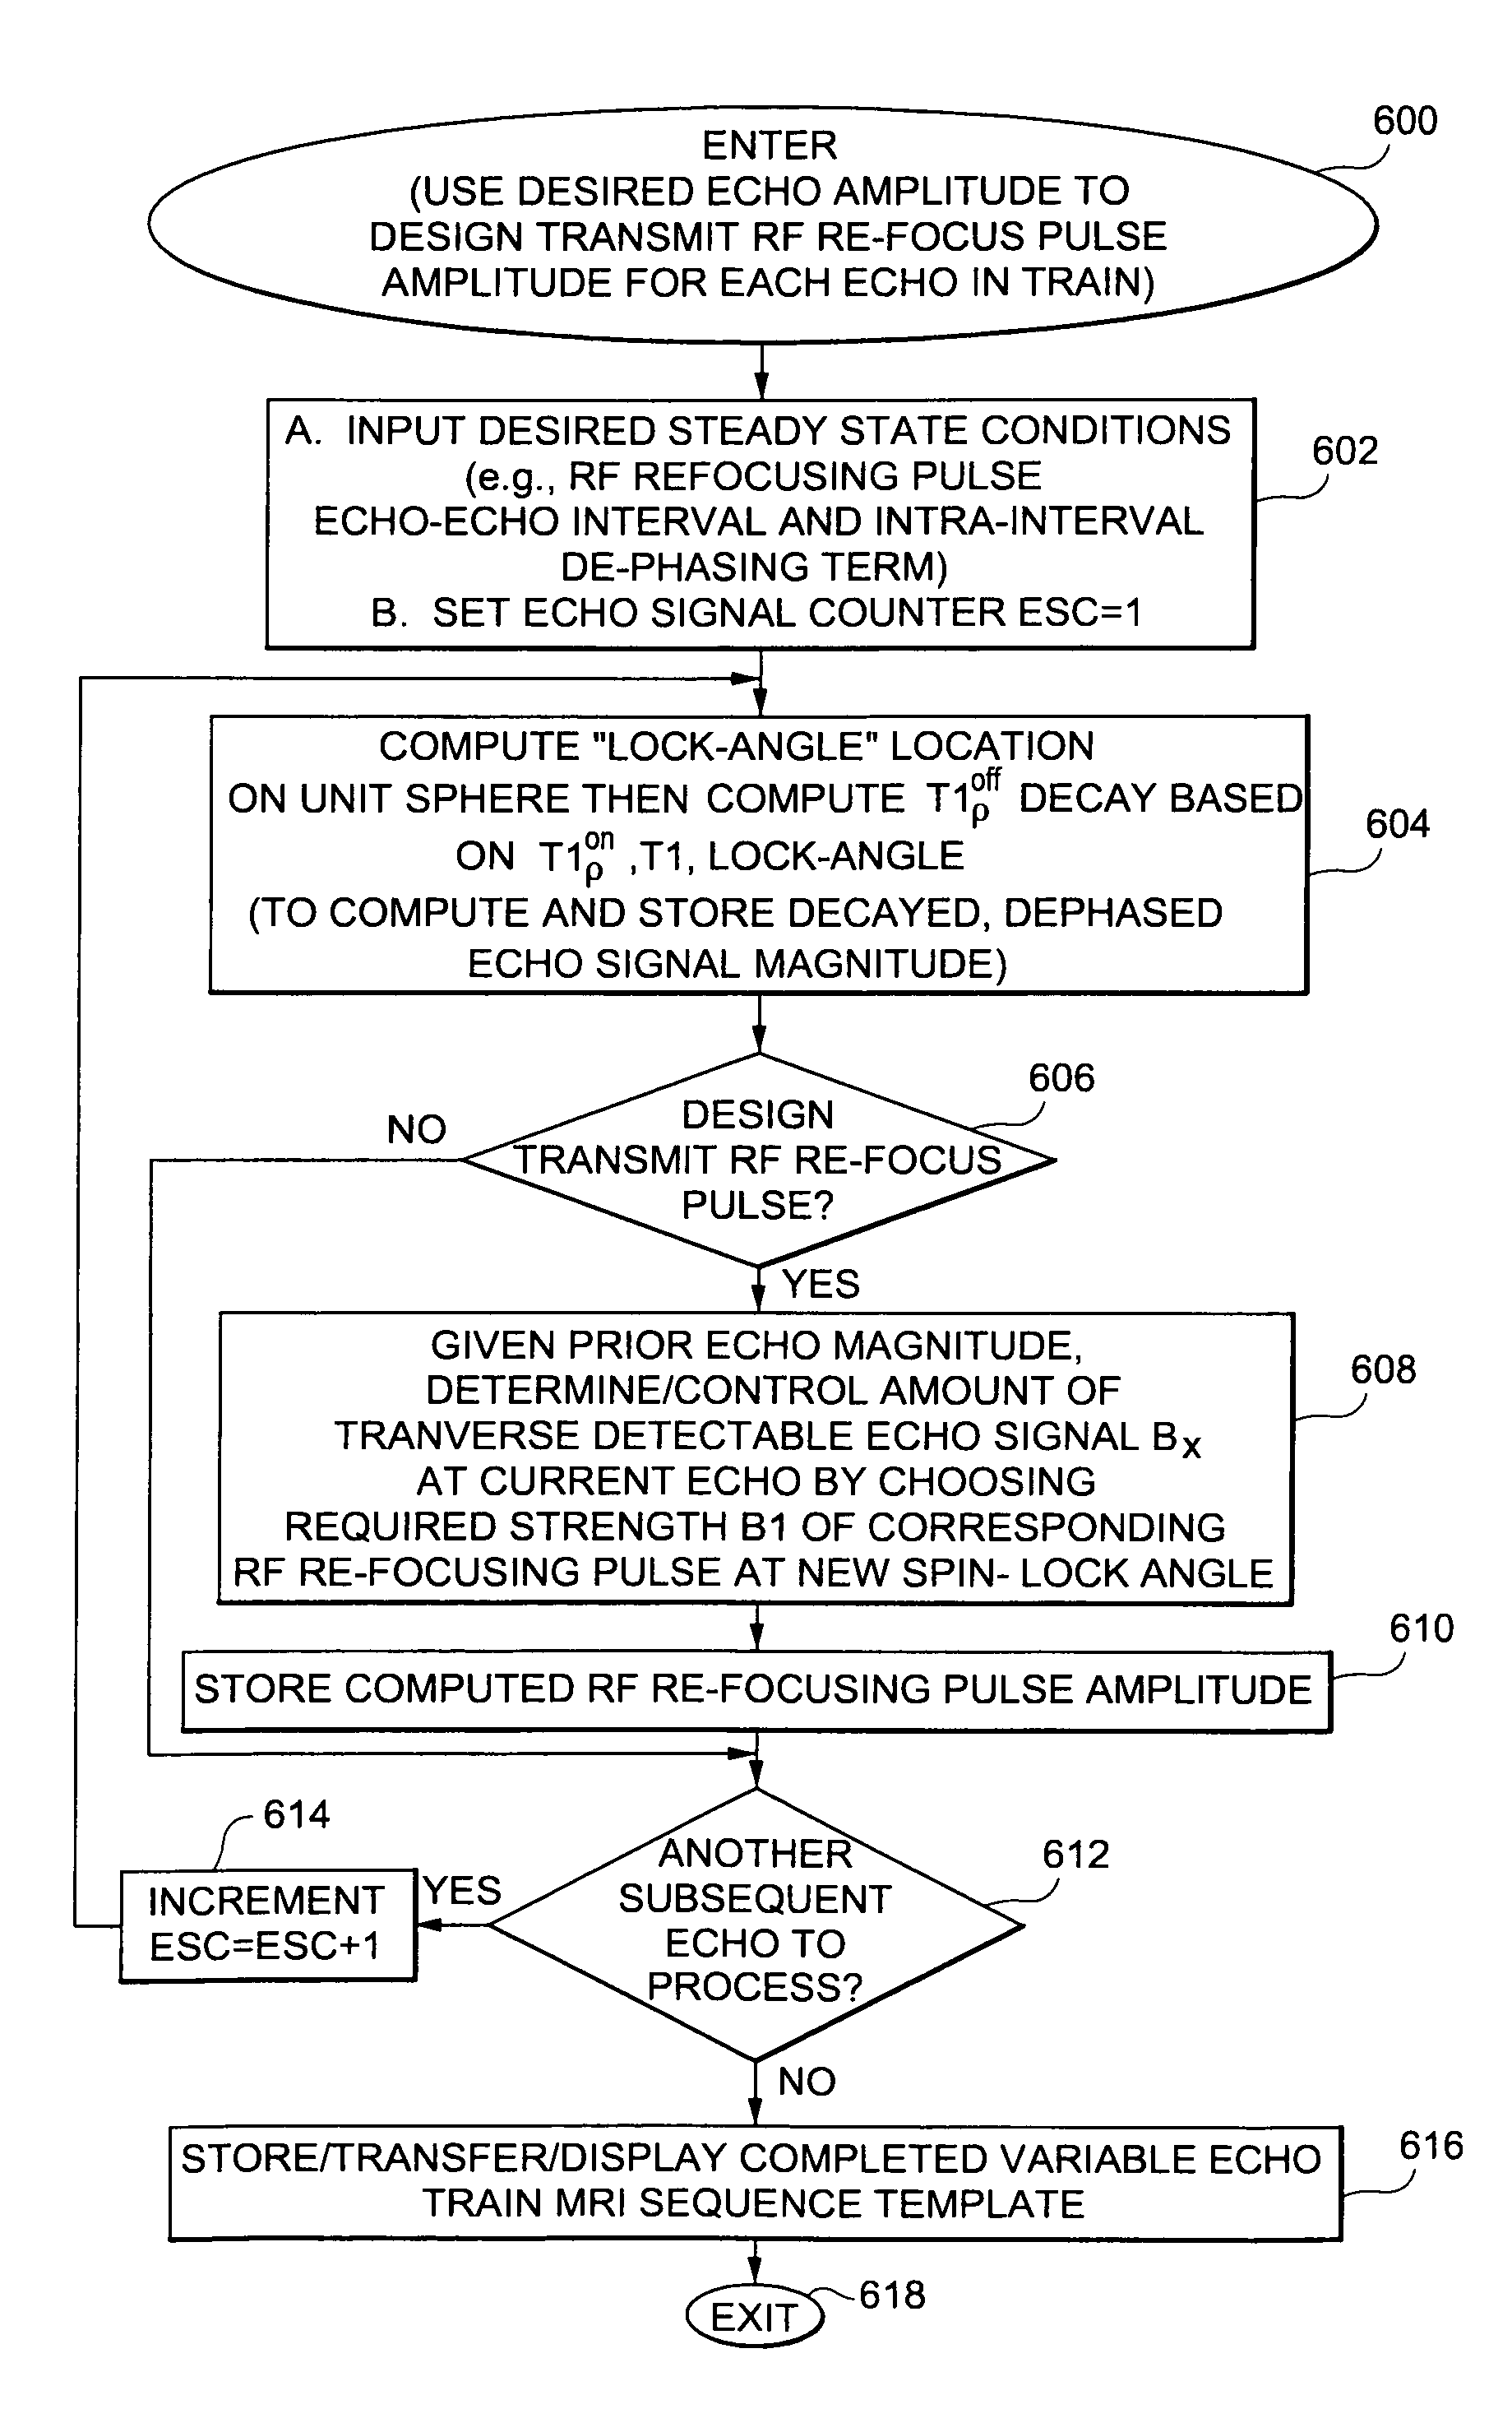 Method and apparatus for designing and/or implementing variable flip angle MRI spin echo train